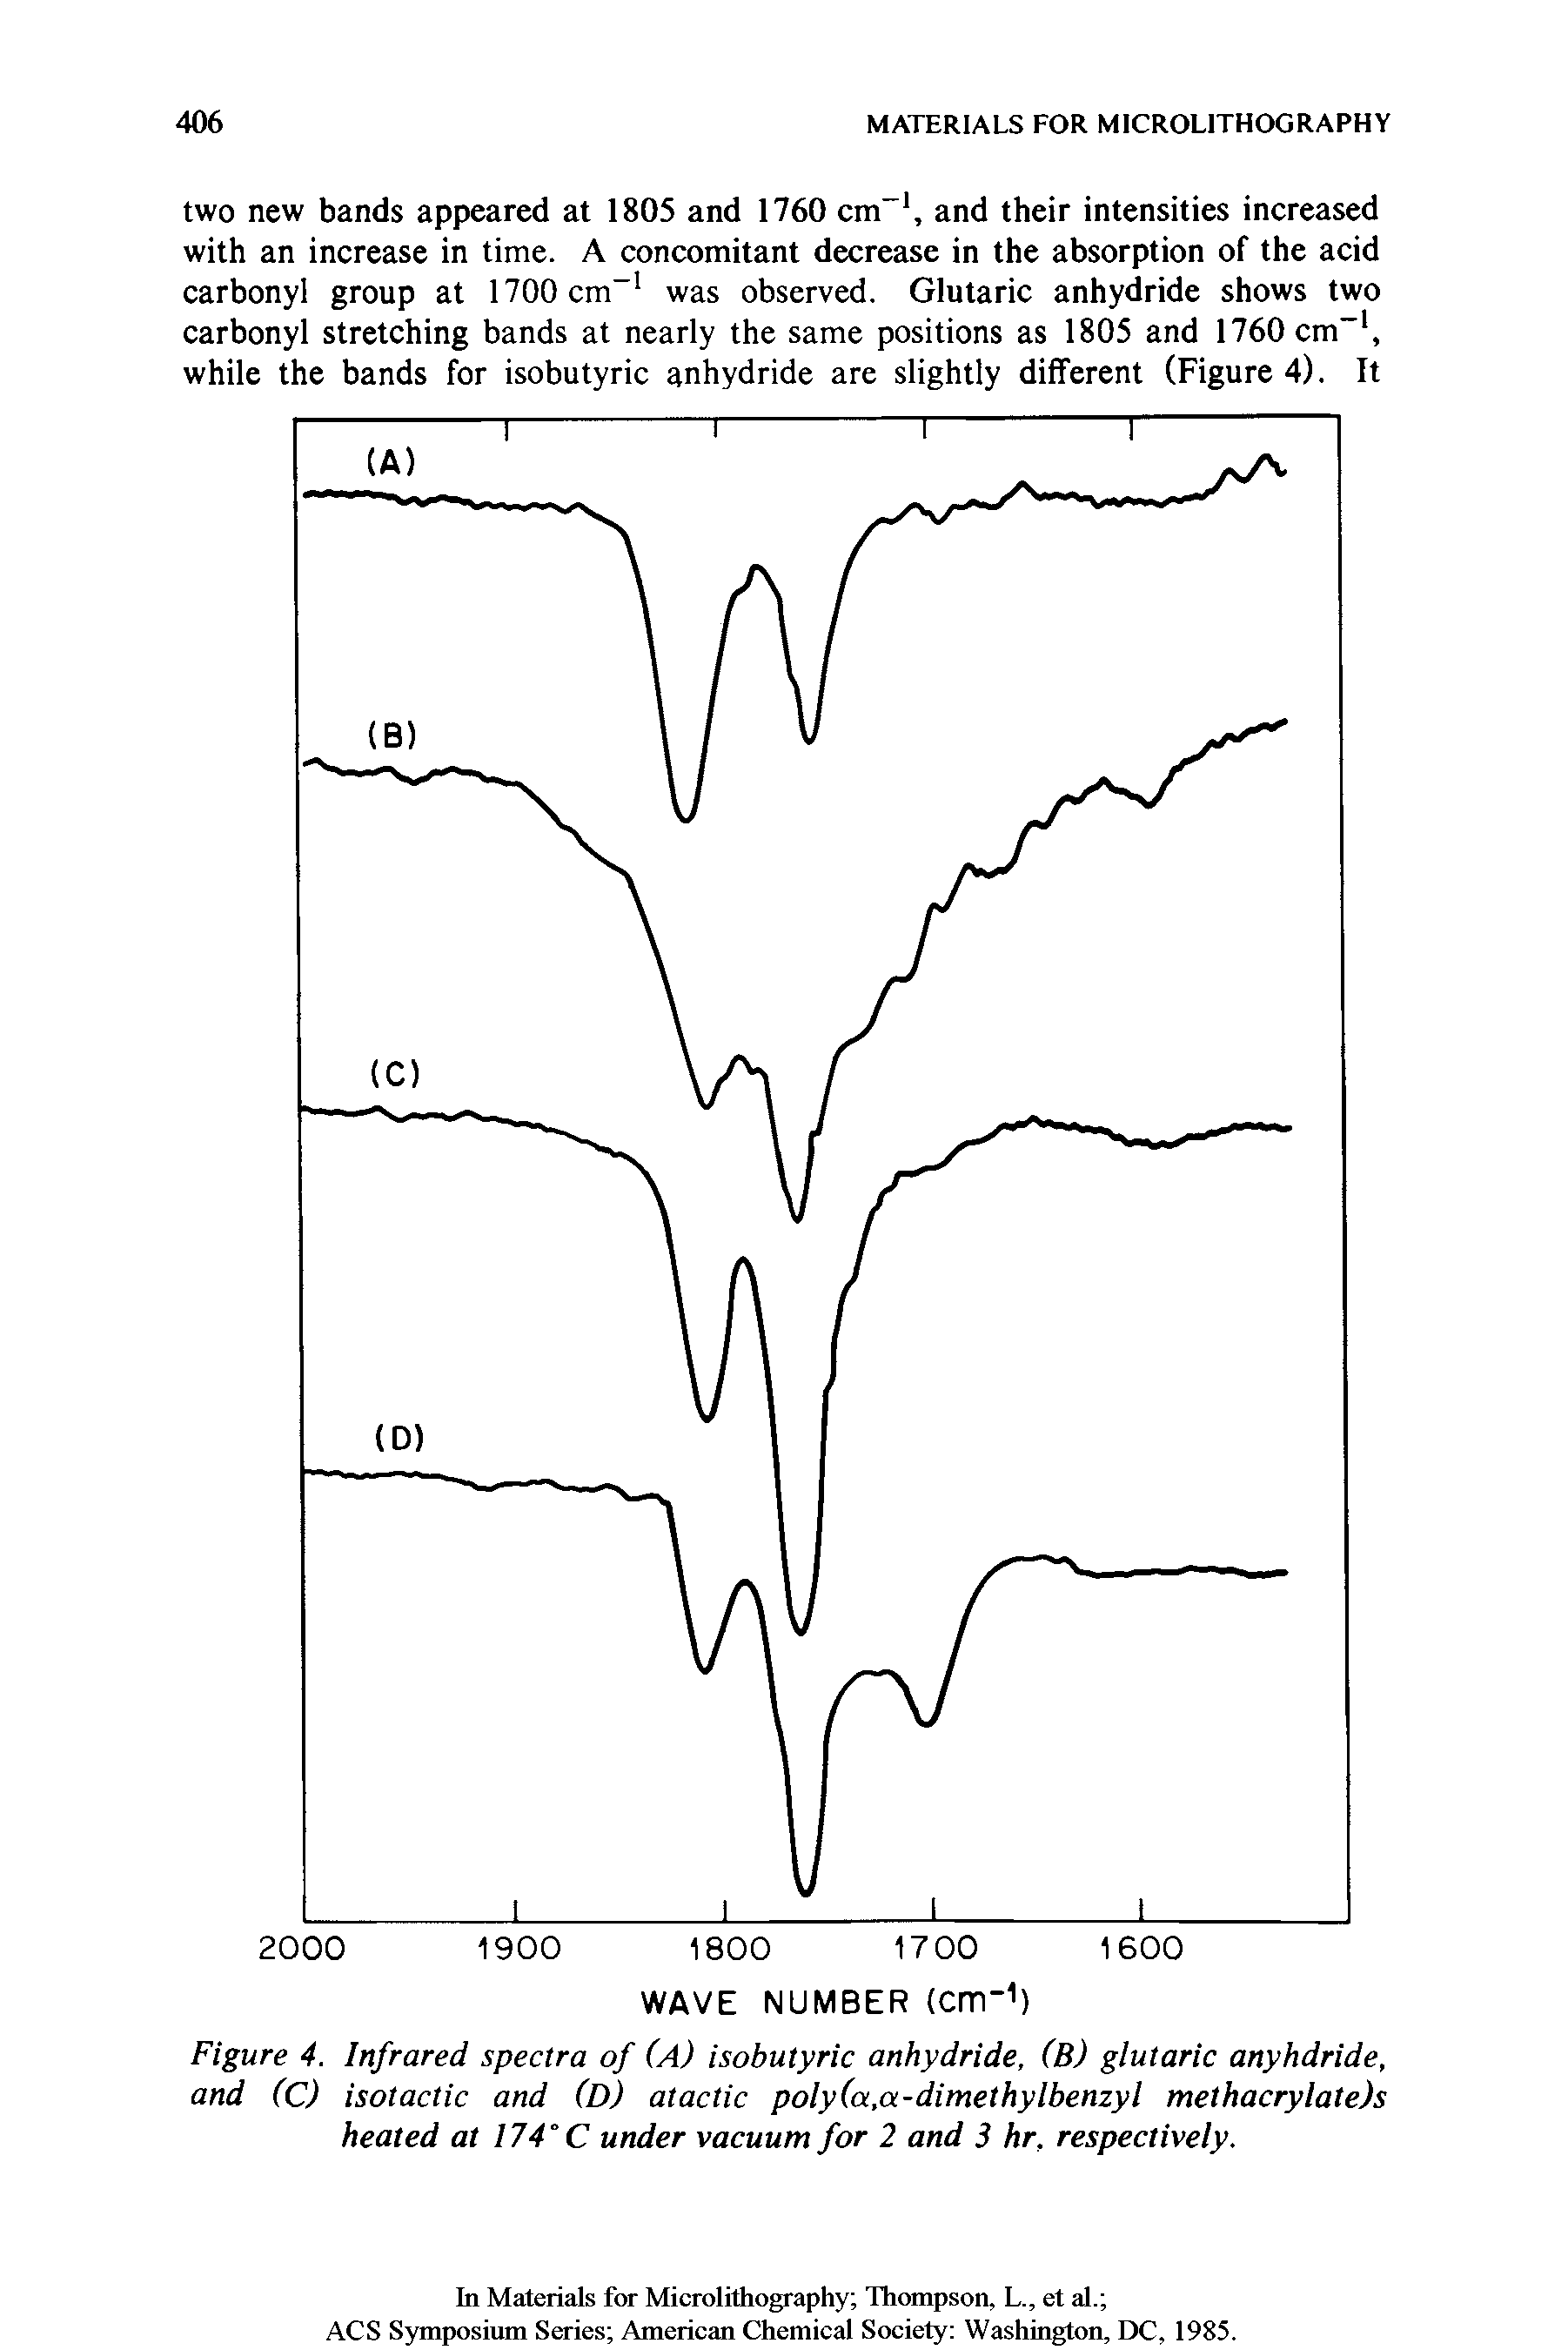 Figure 4. Infrared spectra of (A) isobutyric anhydride, (B) glutaric anyhdride, and (C) isotactic and (D) atactic poly(a,a-dimethylbenzyl methacrylate)s heated at 174° C under vacuum for 2 and 3 hr, respectively.